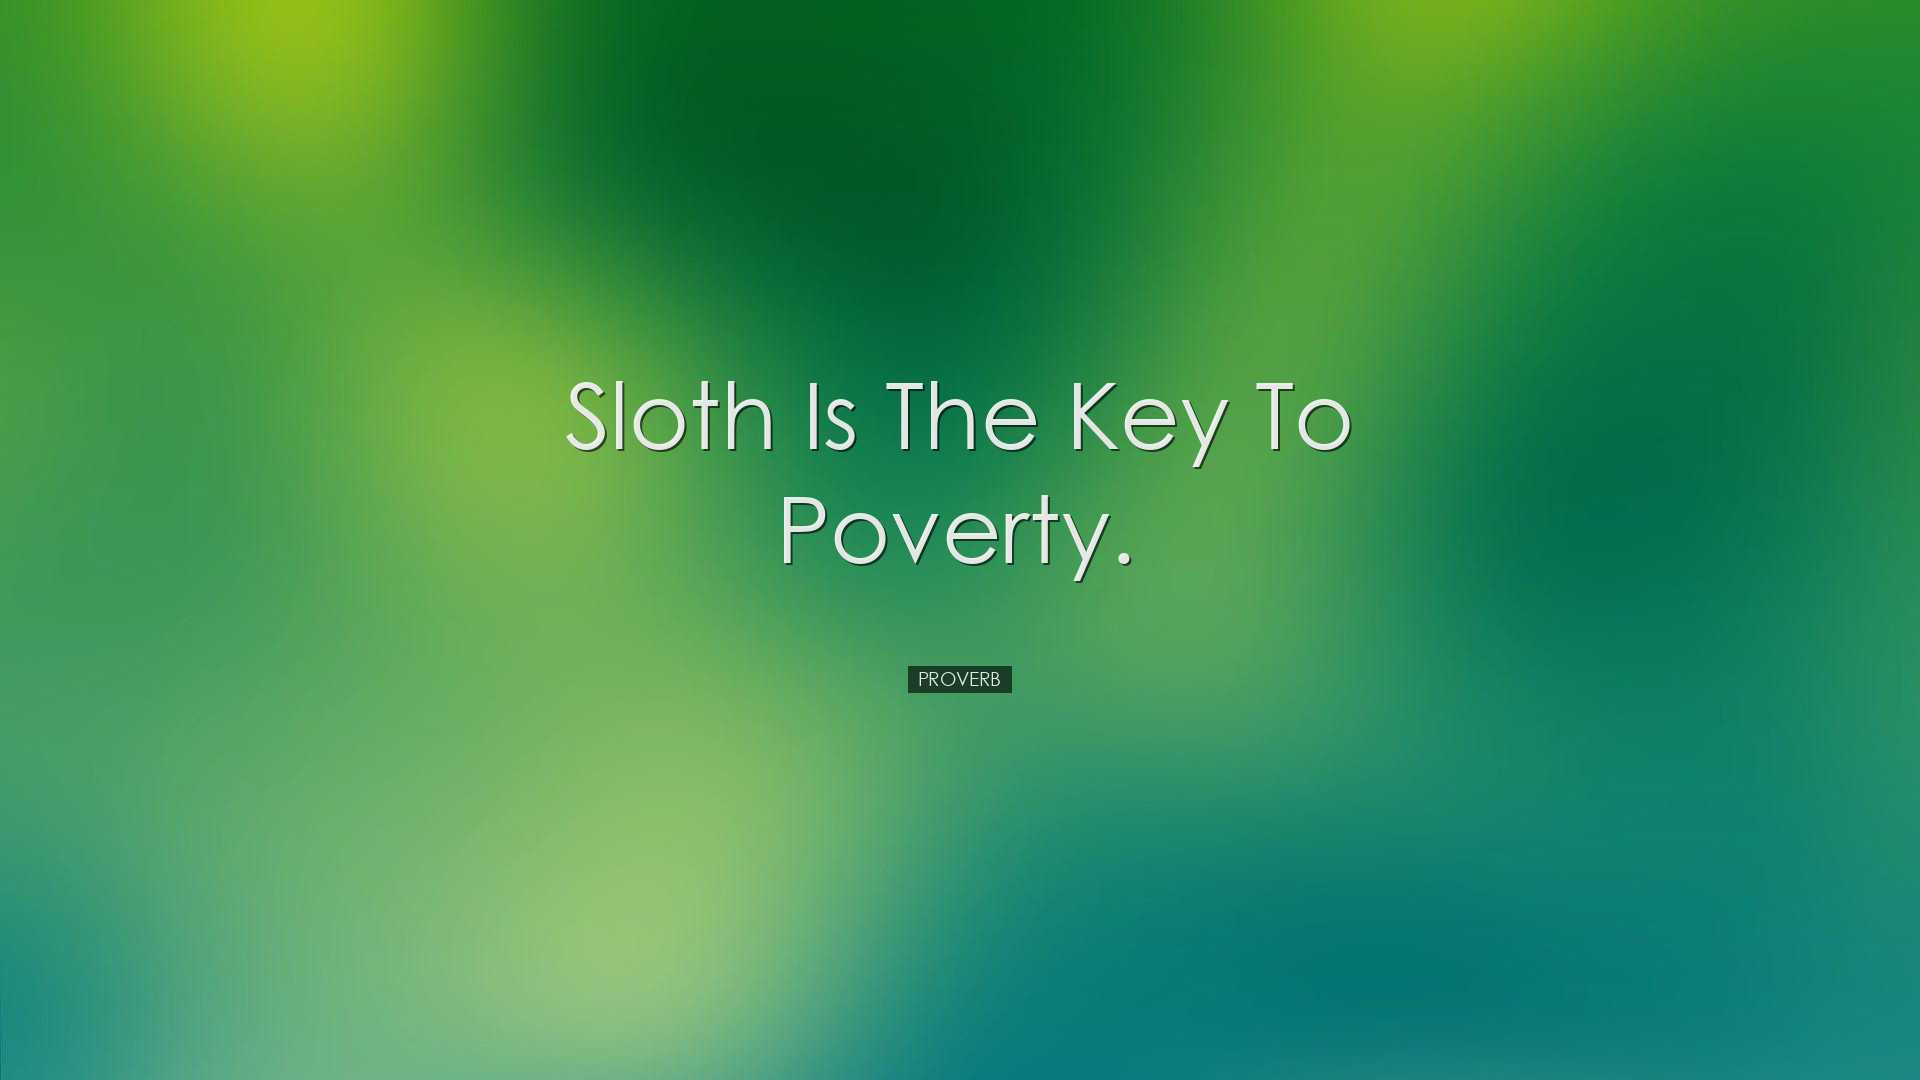 Sloth is the key to poverty. - Proverb